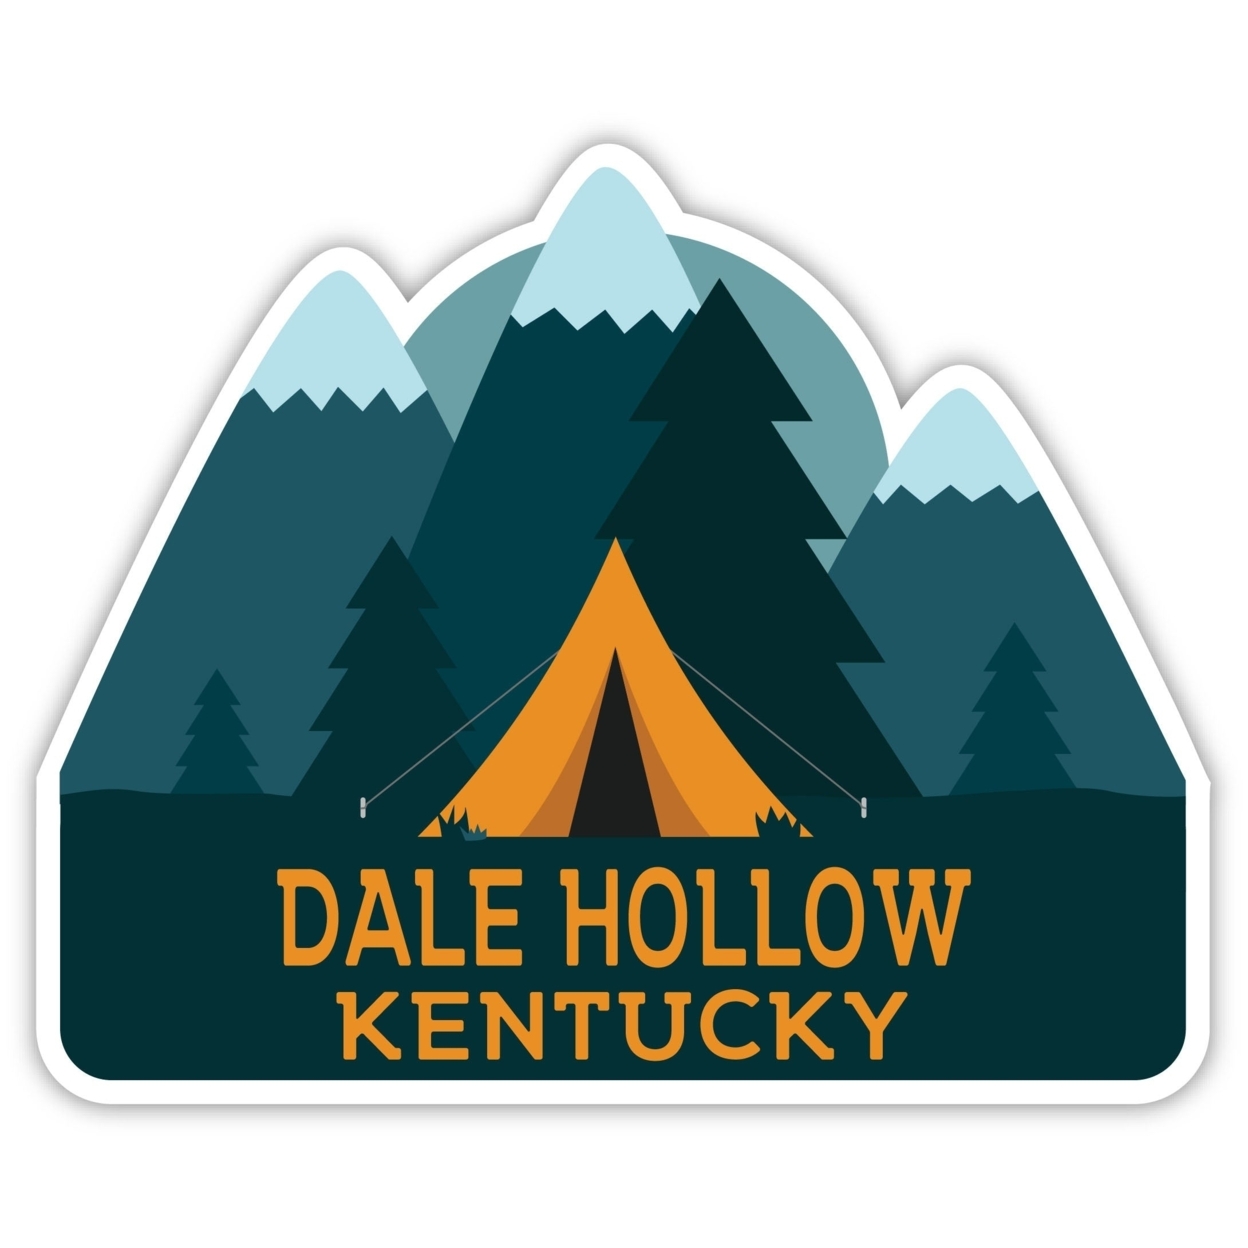 Dale Hollow Kentucky Souvenir Decorative Stickers (Choose Theme And Size) - 4-Pack, 8-Inch, Tent